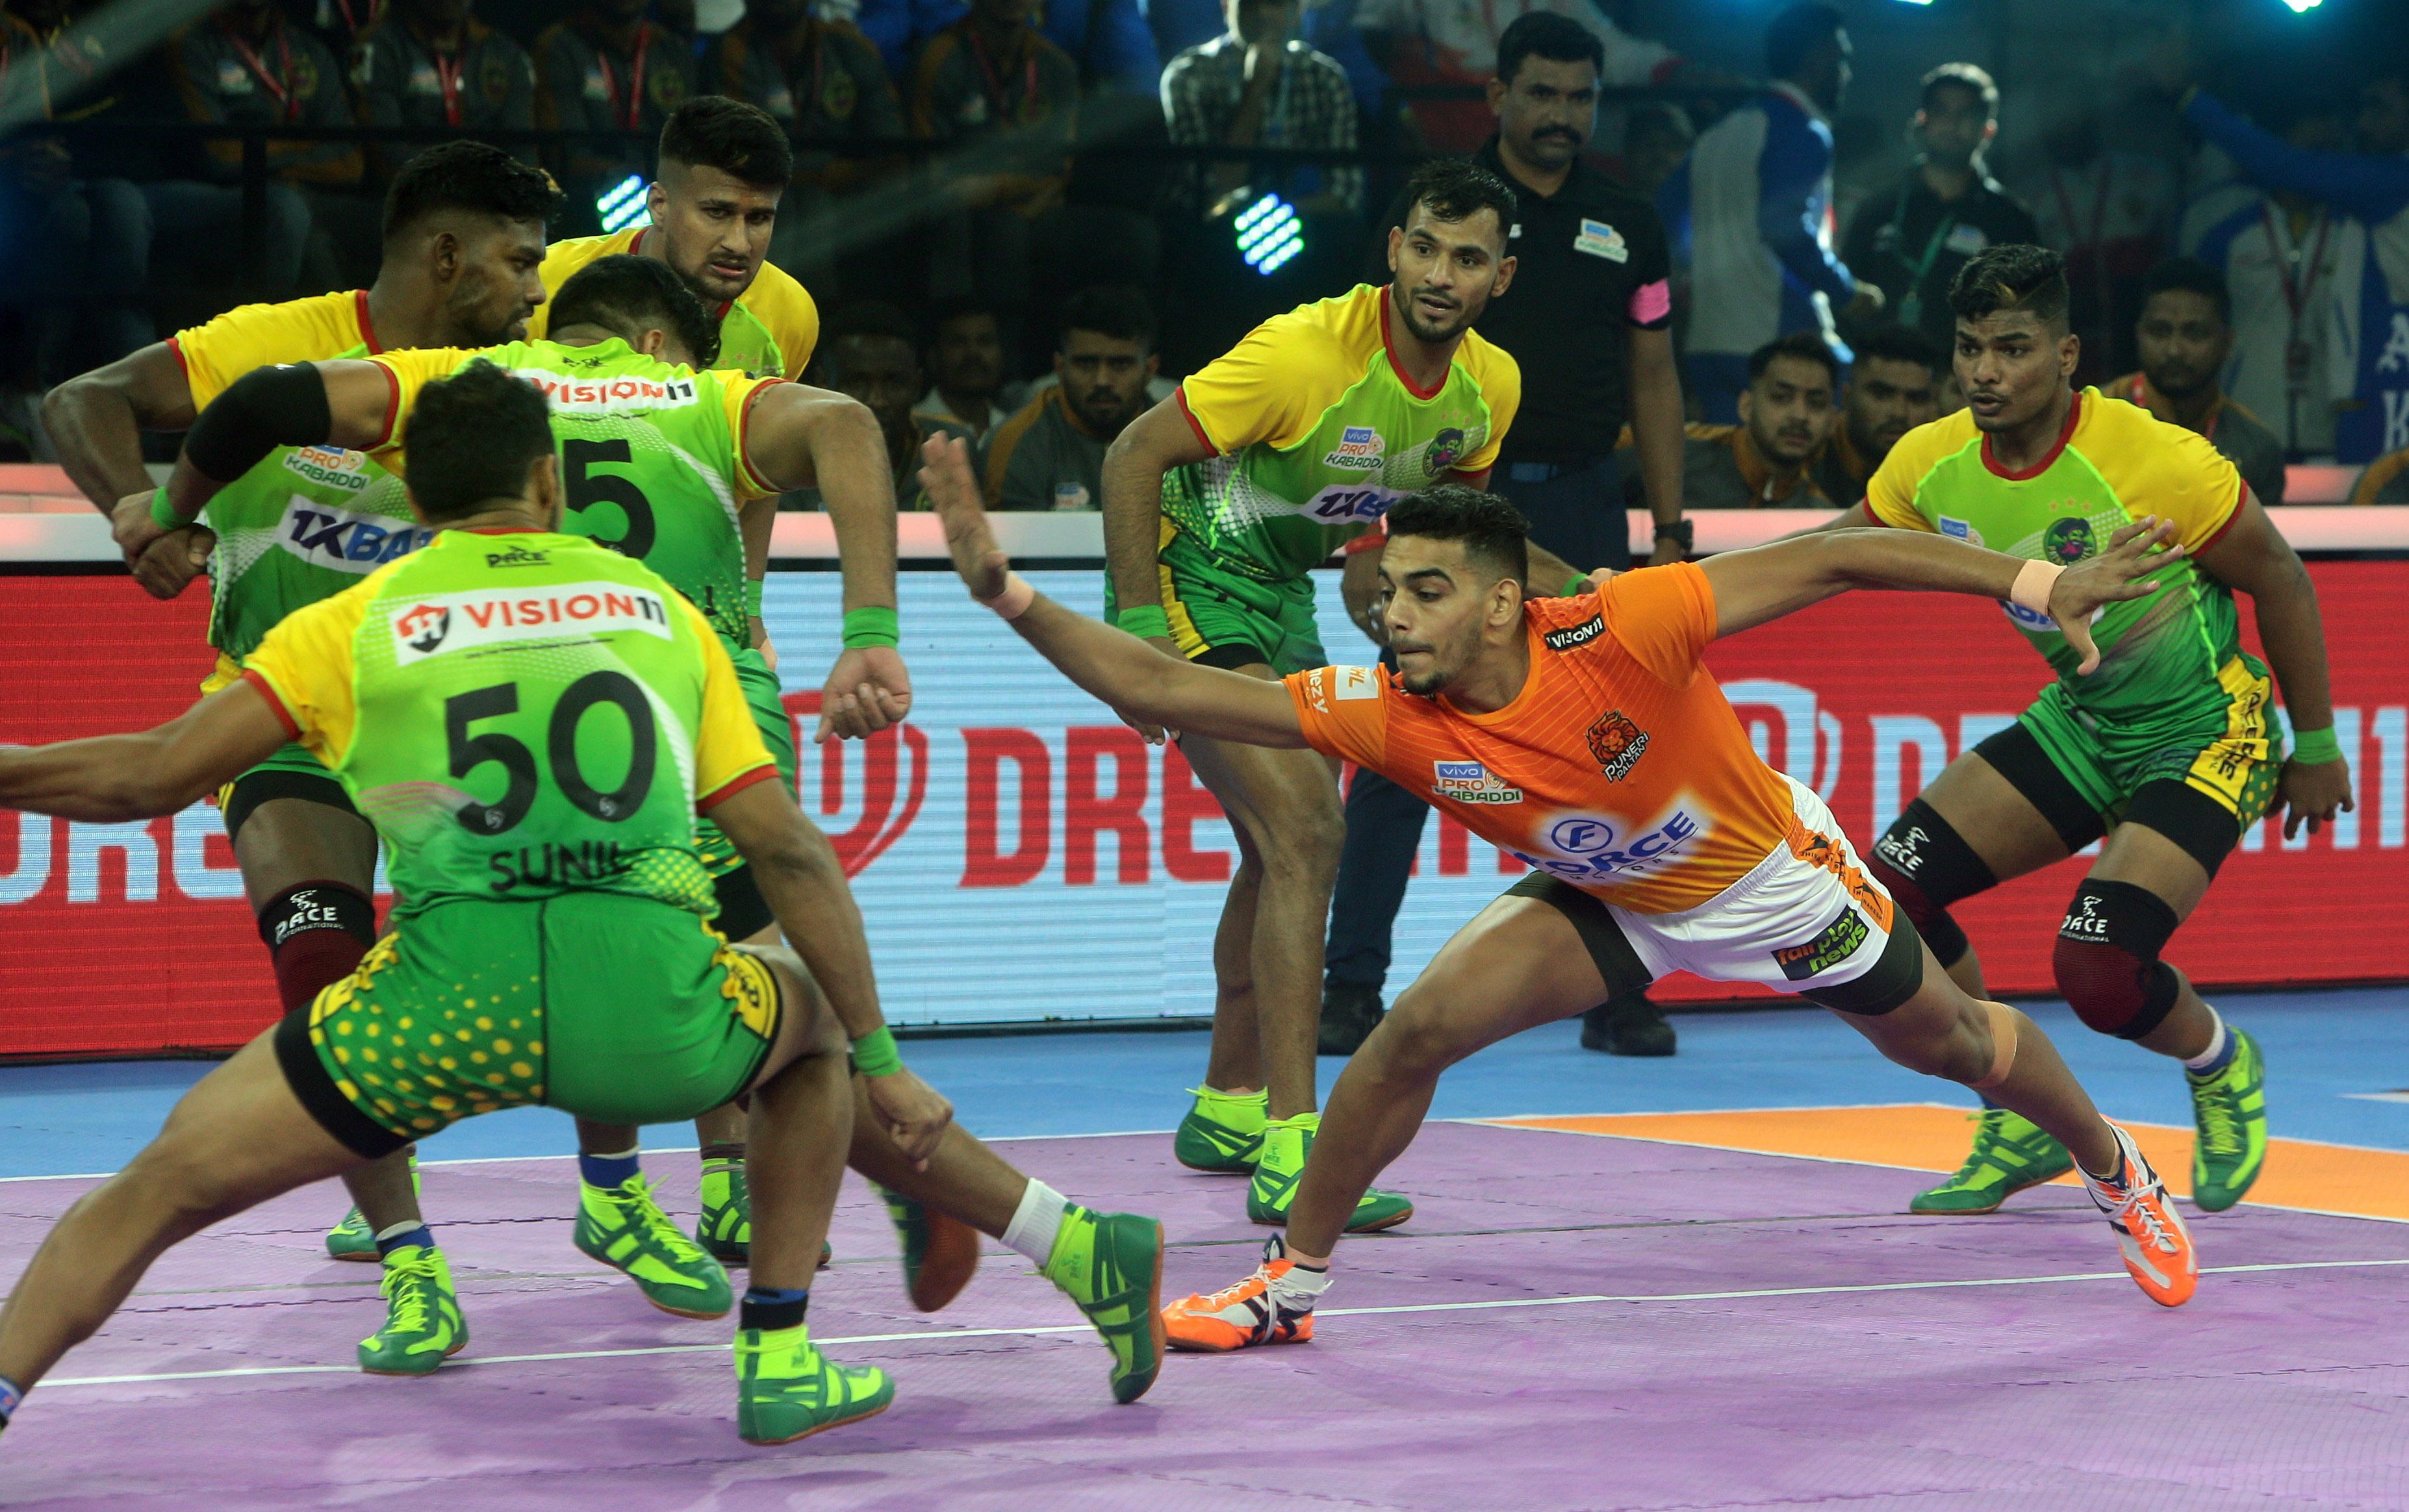 PKL 2022 HIGHLIGHTS: Record champions Patna Pirates and Puneri Paltan play thrilling 34-34 TIE in their Pro Kabaddi League 9 opener